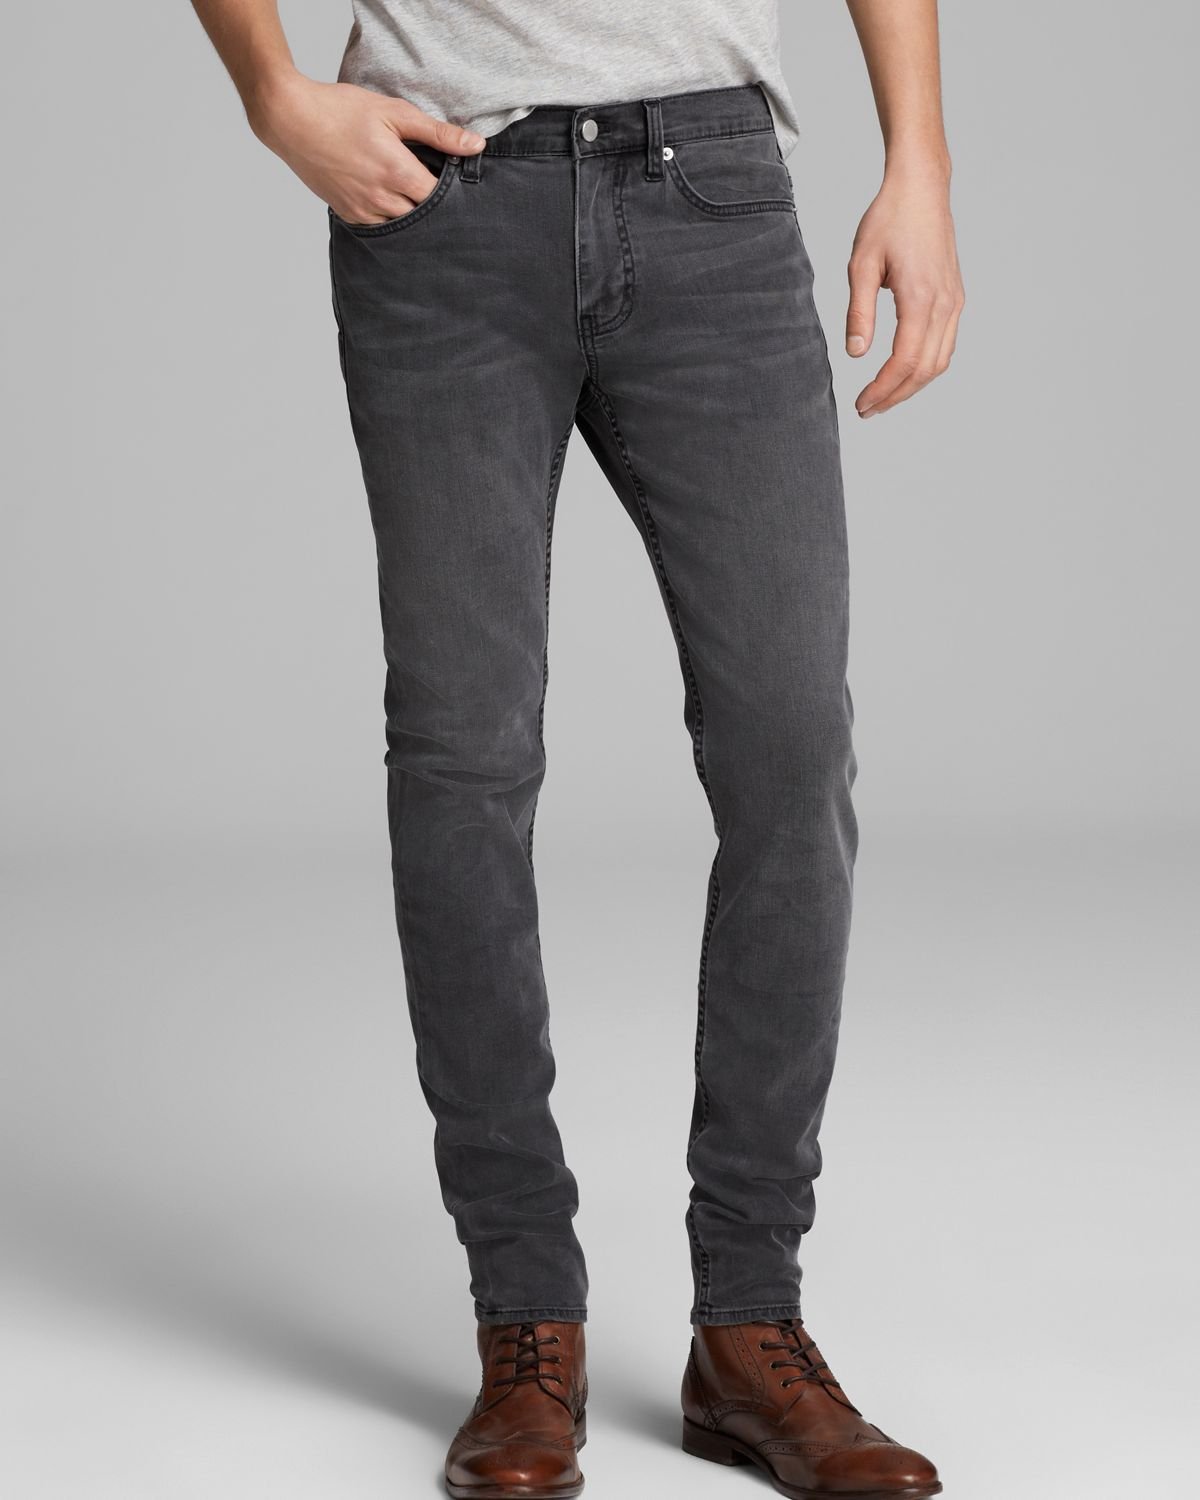 Lyst - Blk dnm Jeans Slim Fit in Classic Wash Grey in Gray for Men